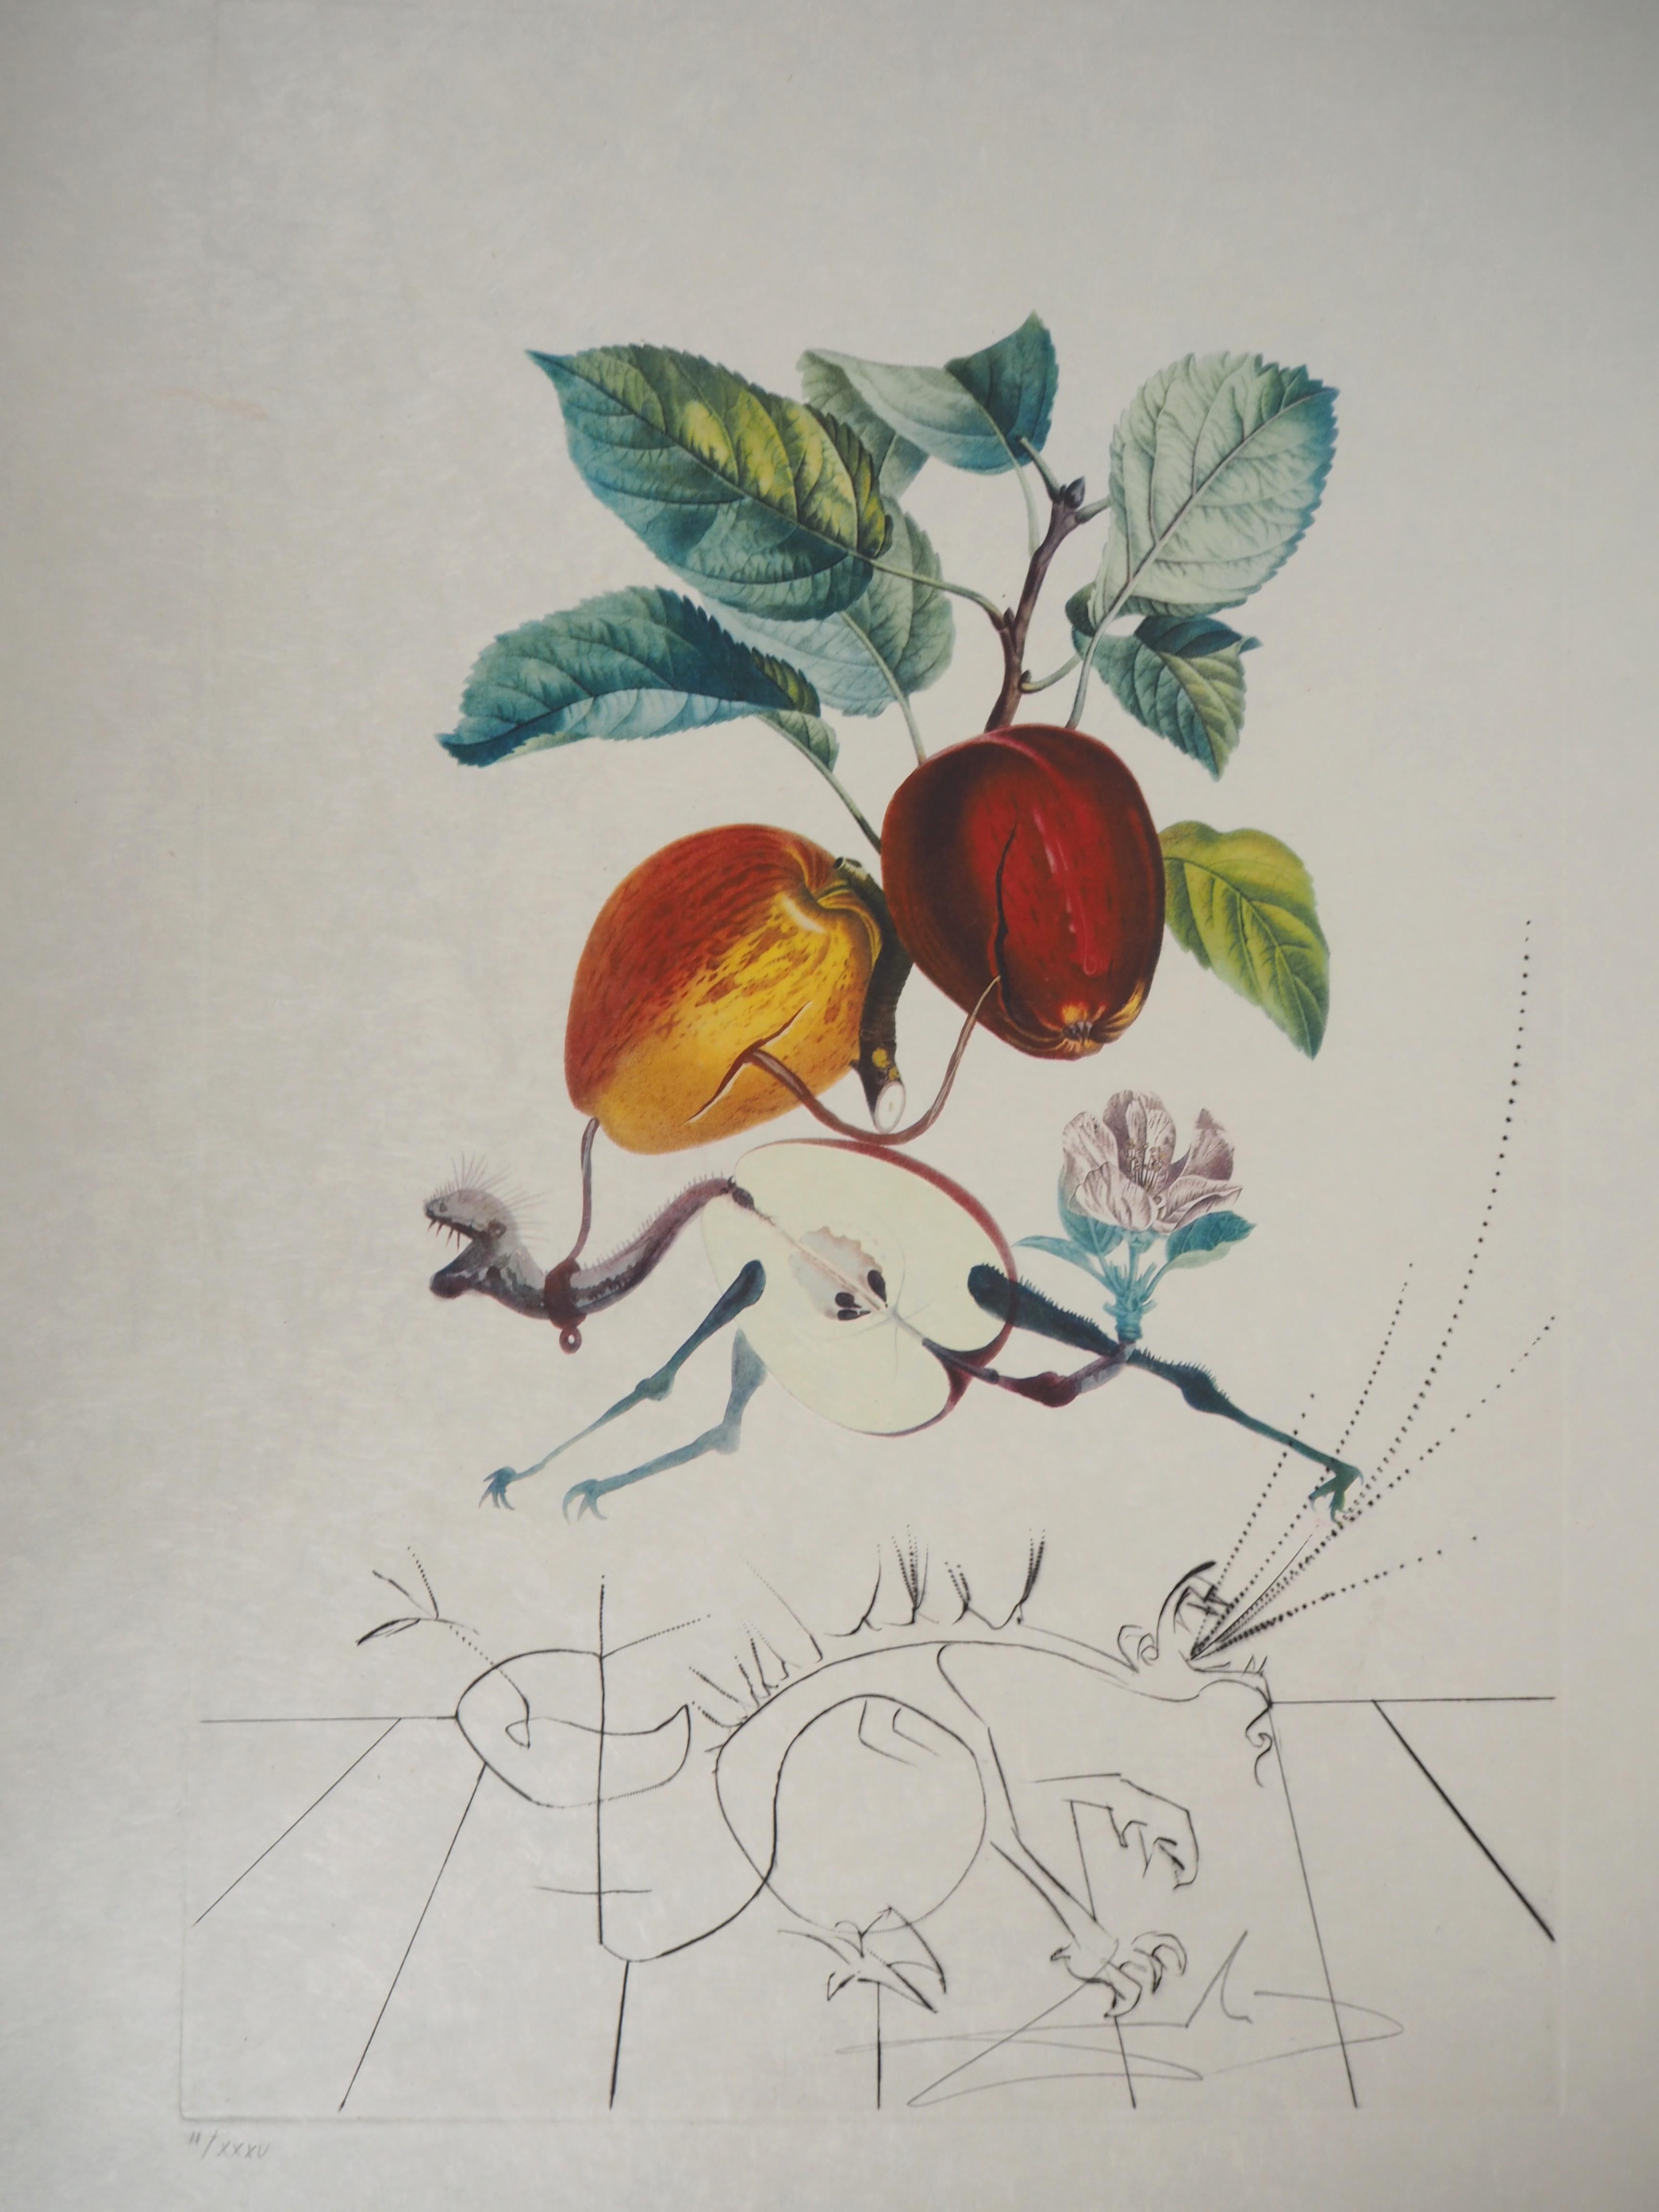 Flordali : The Fruits, Eve's Apple - Original Handsigned Etching (Field 69-11A) - Print by Salvador Dalí